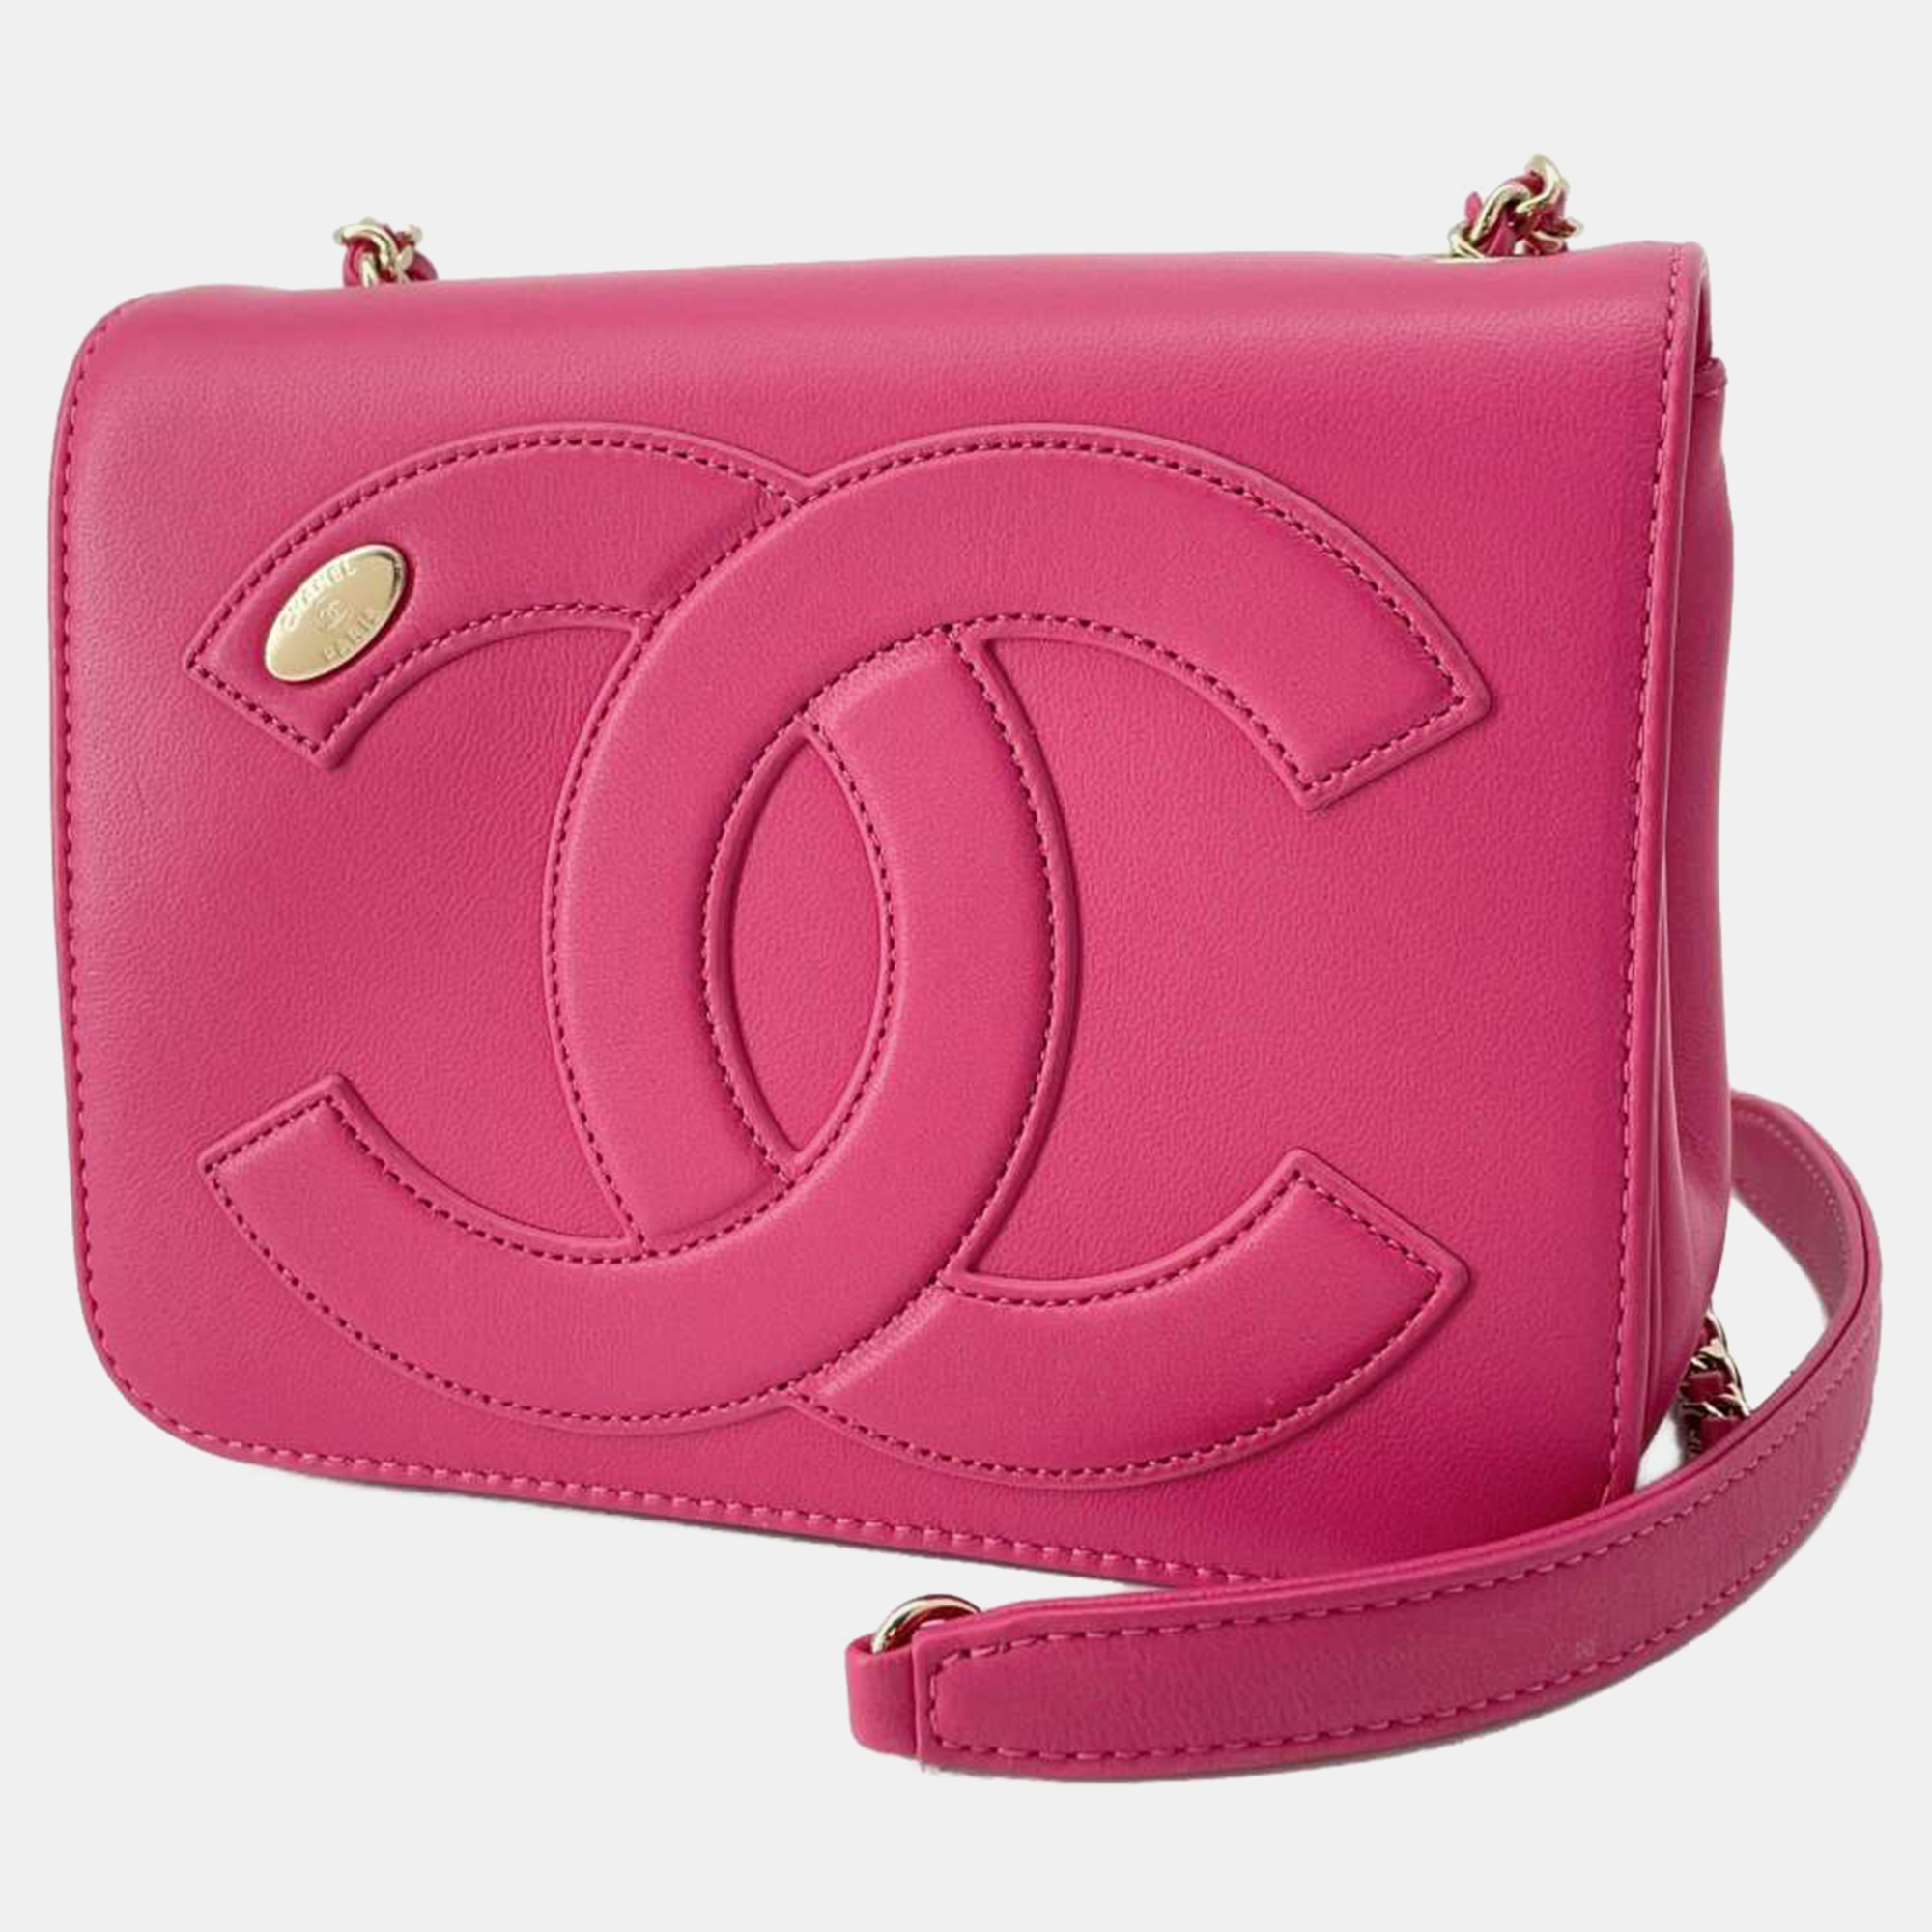 Chanel pink leather cc mania flap bag